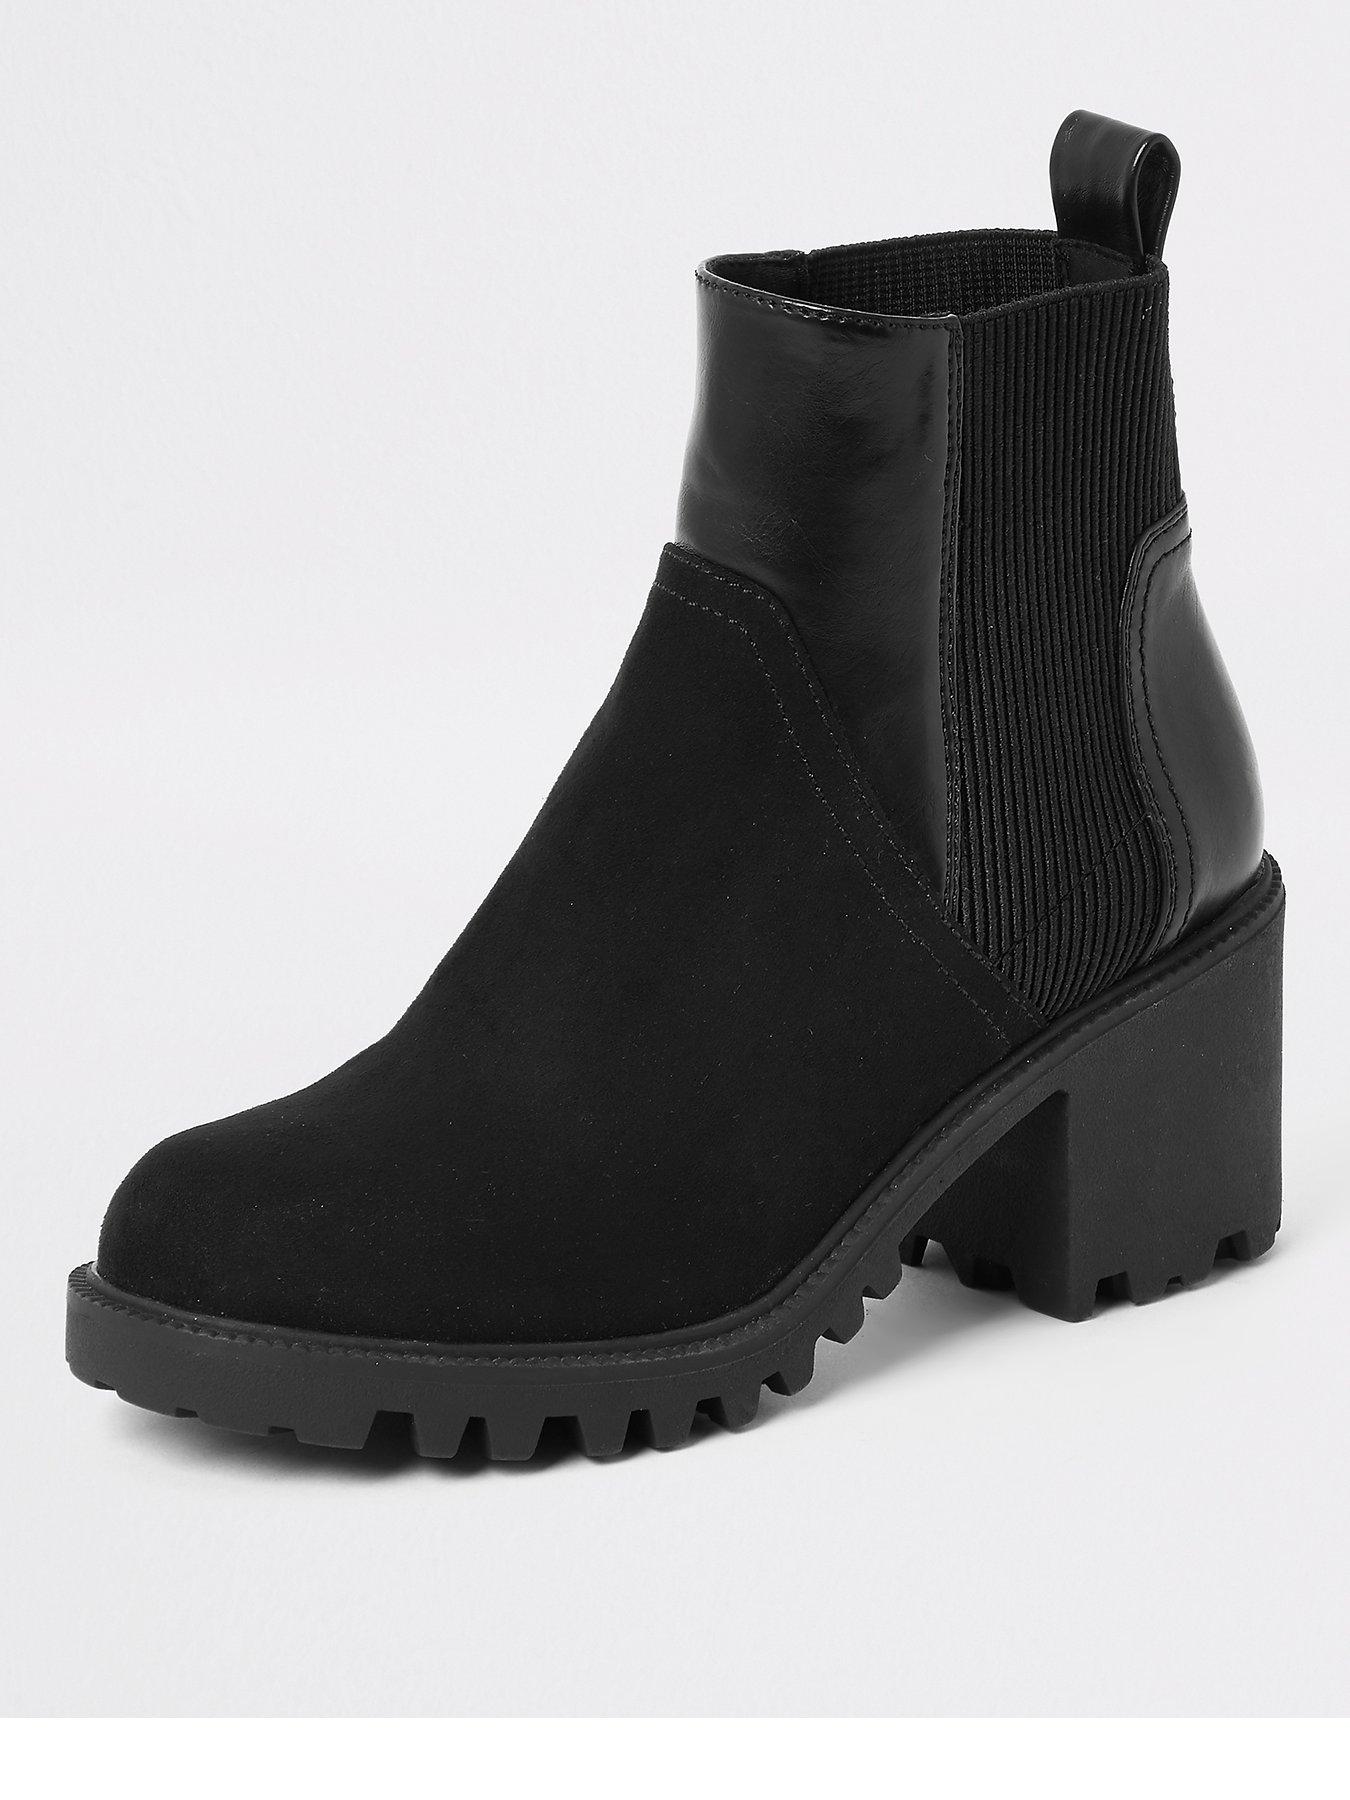 River Island Chunky Ankle Boots - Black 